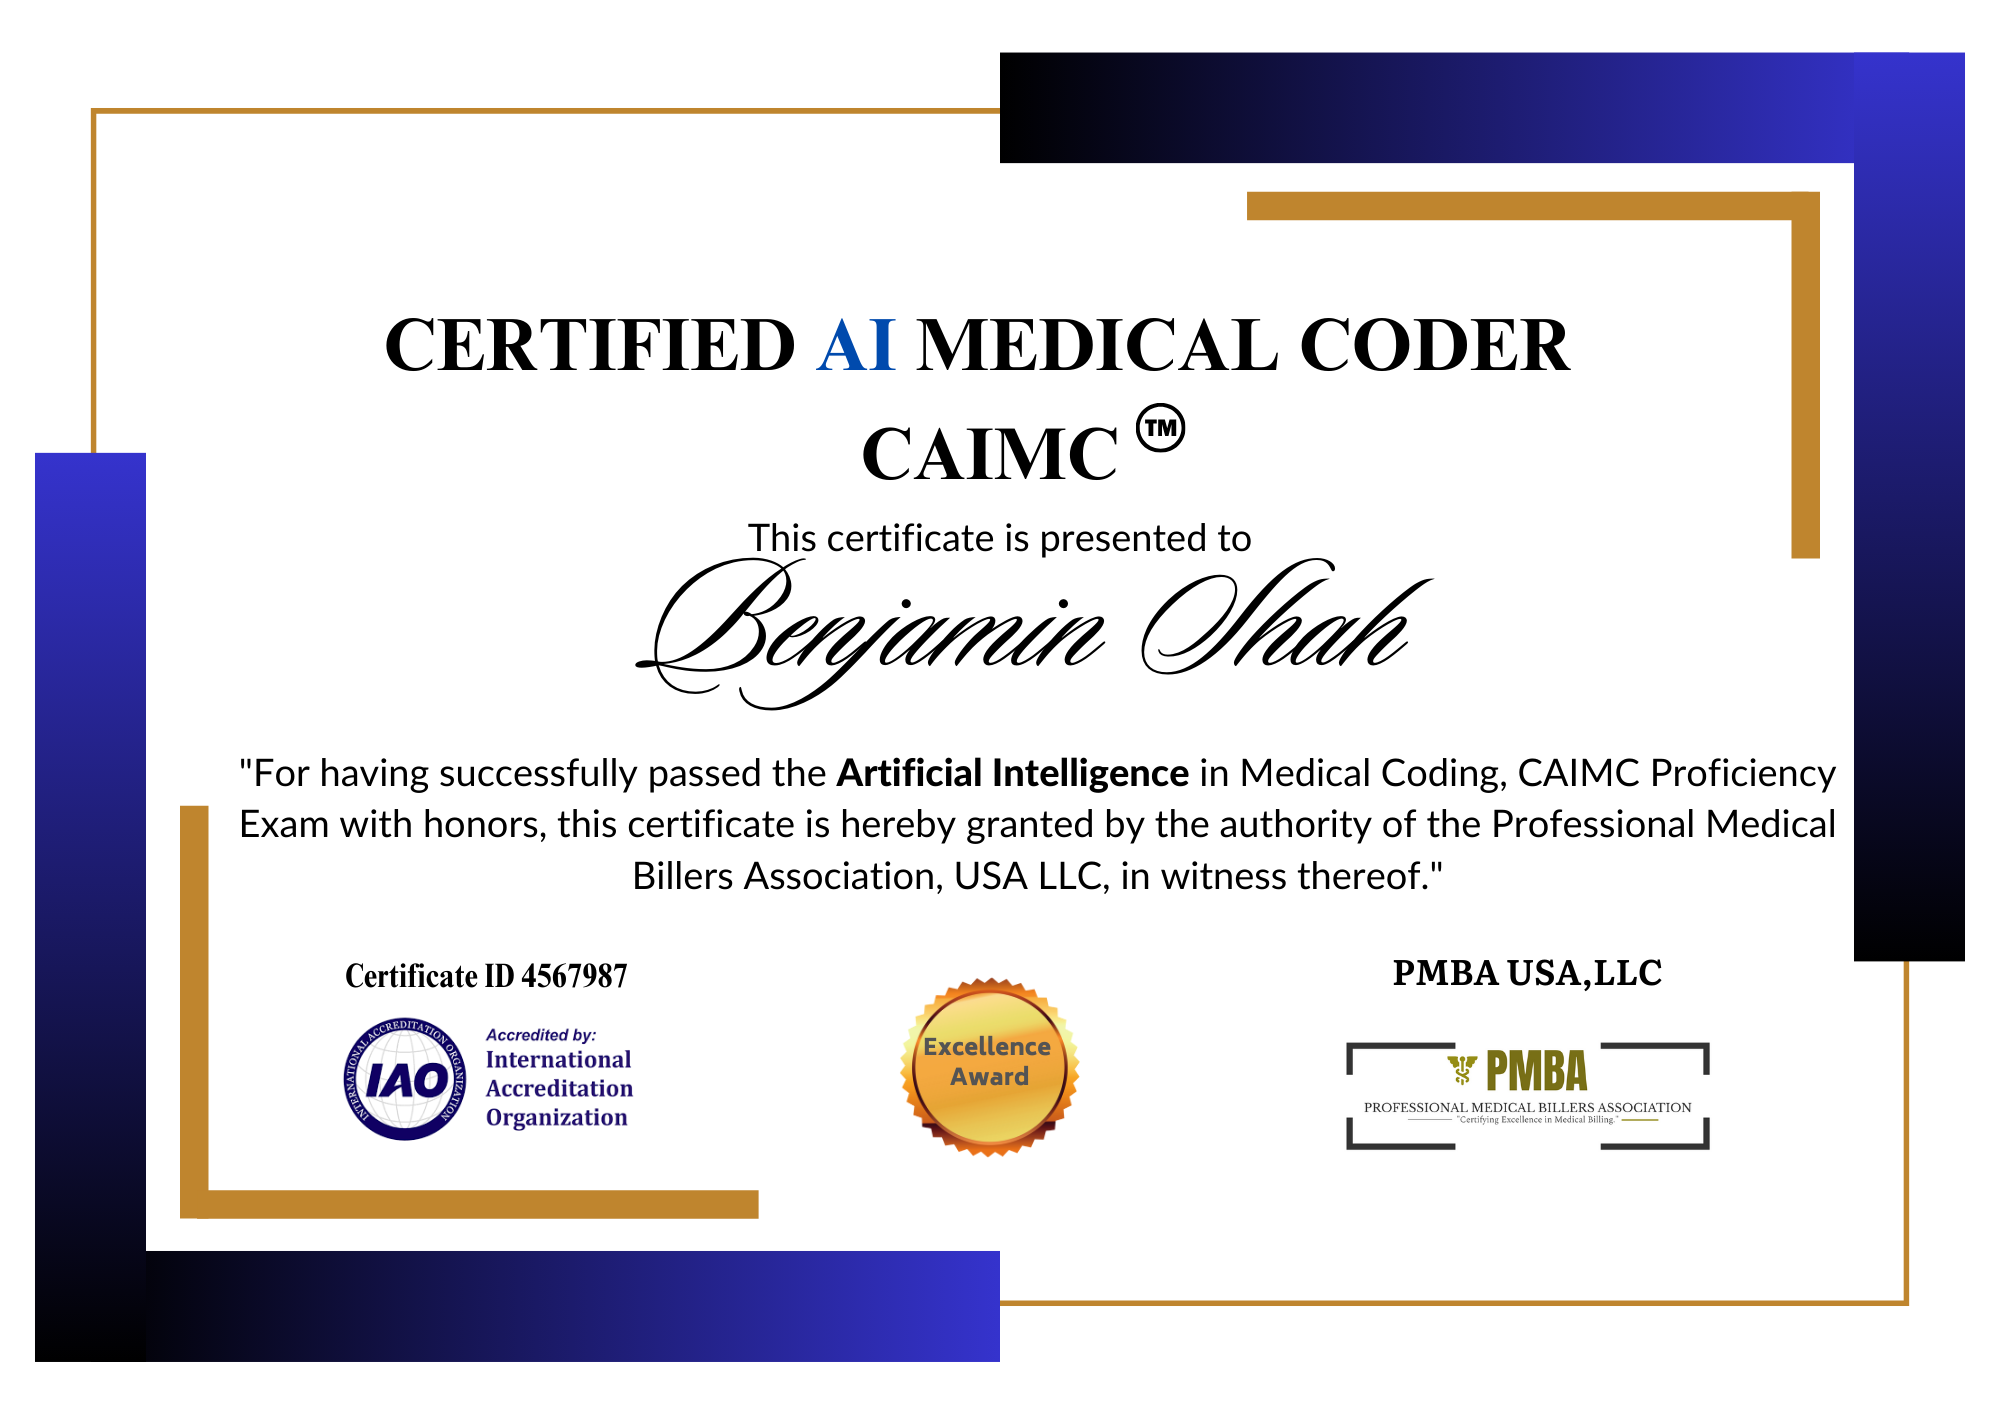 Certified AI Medical Coder